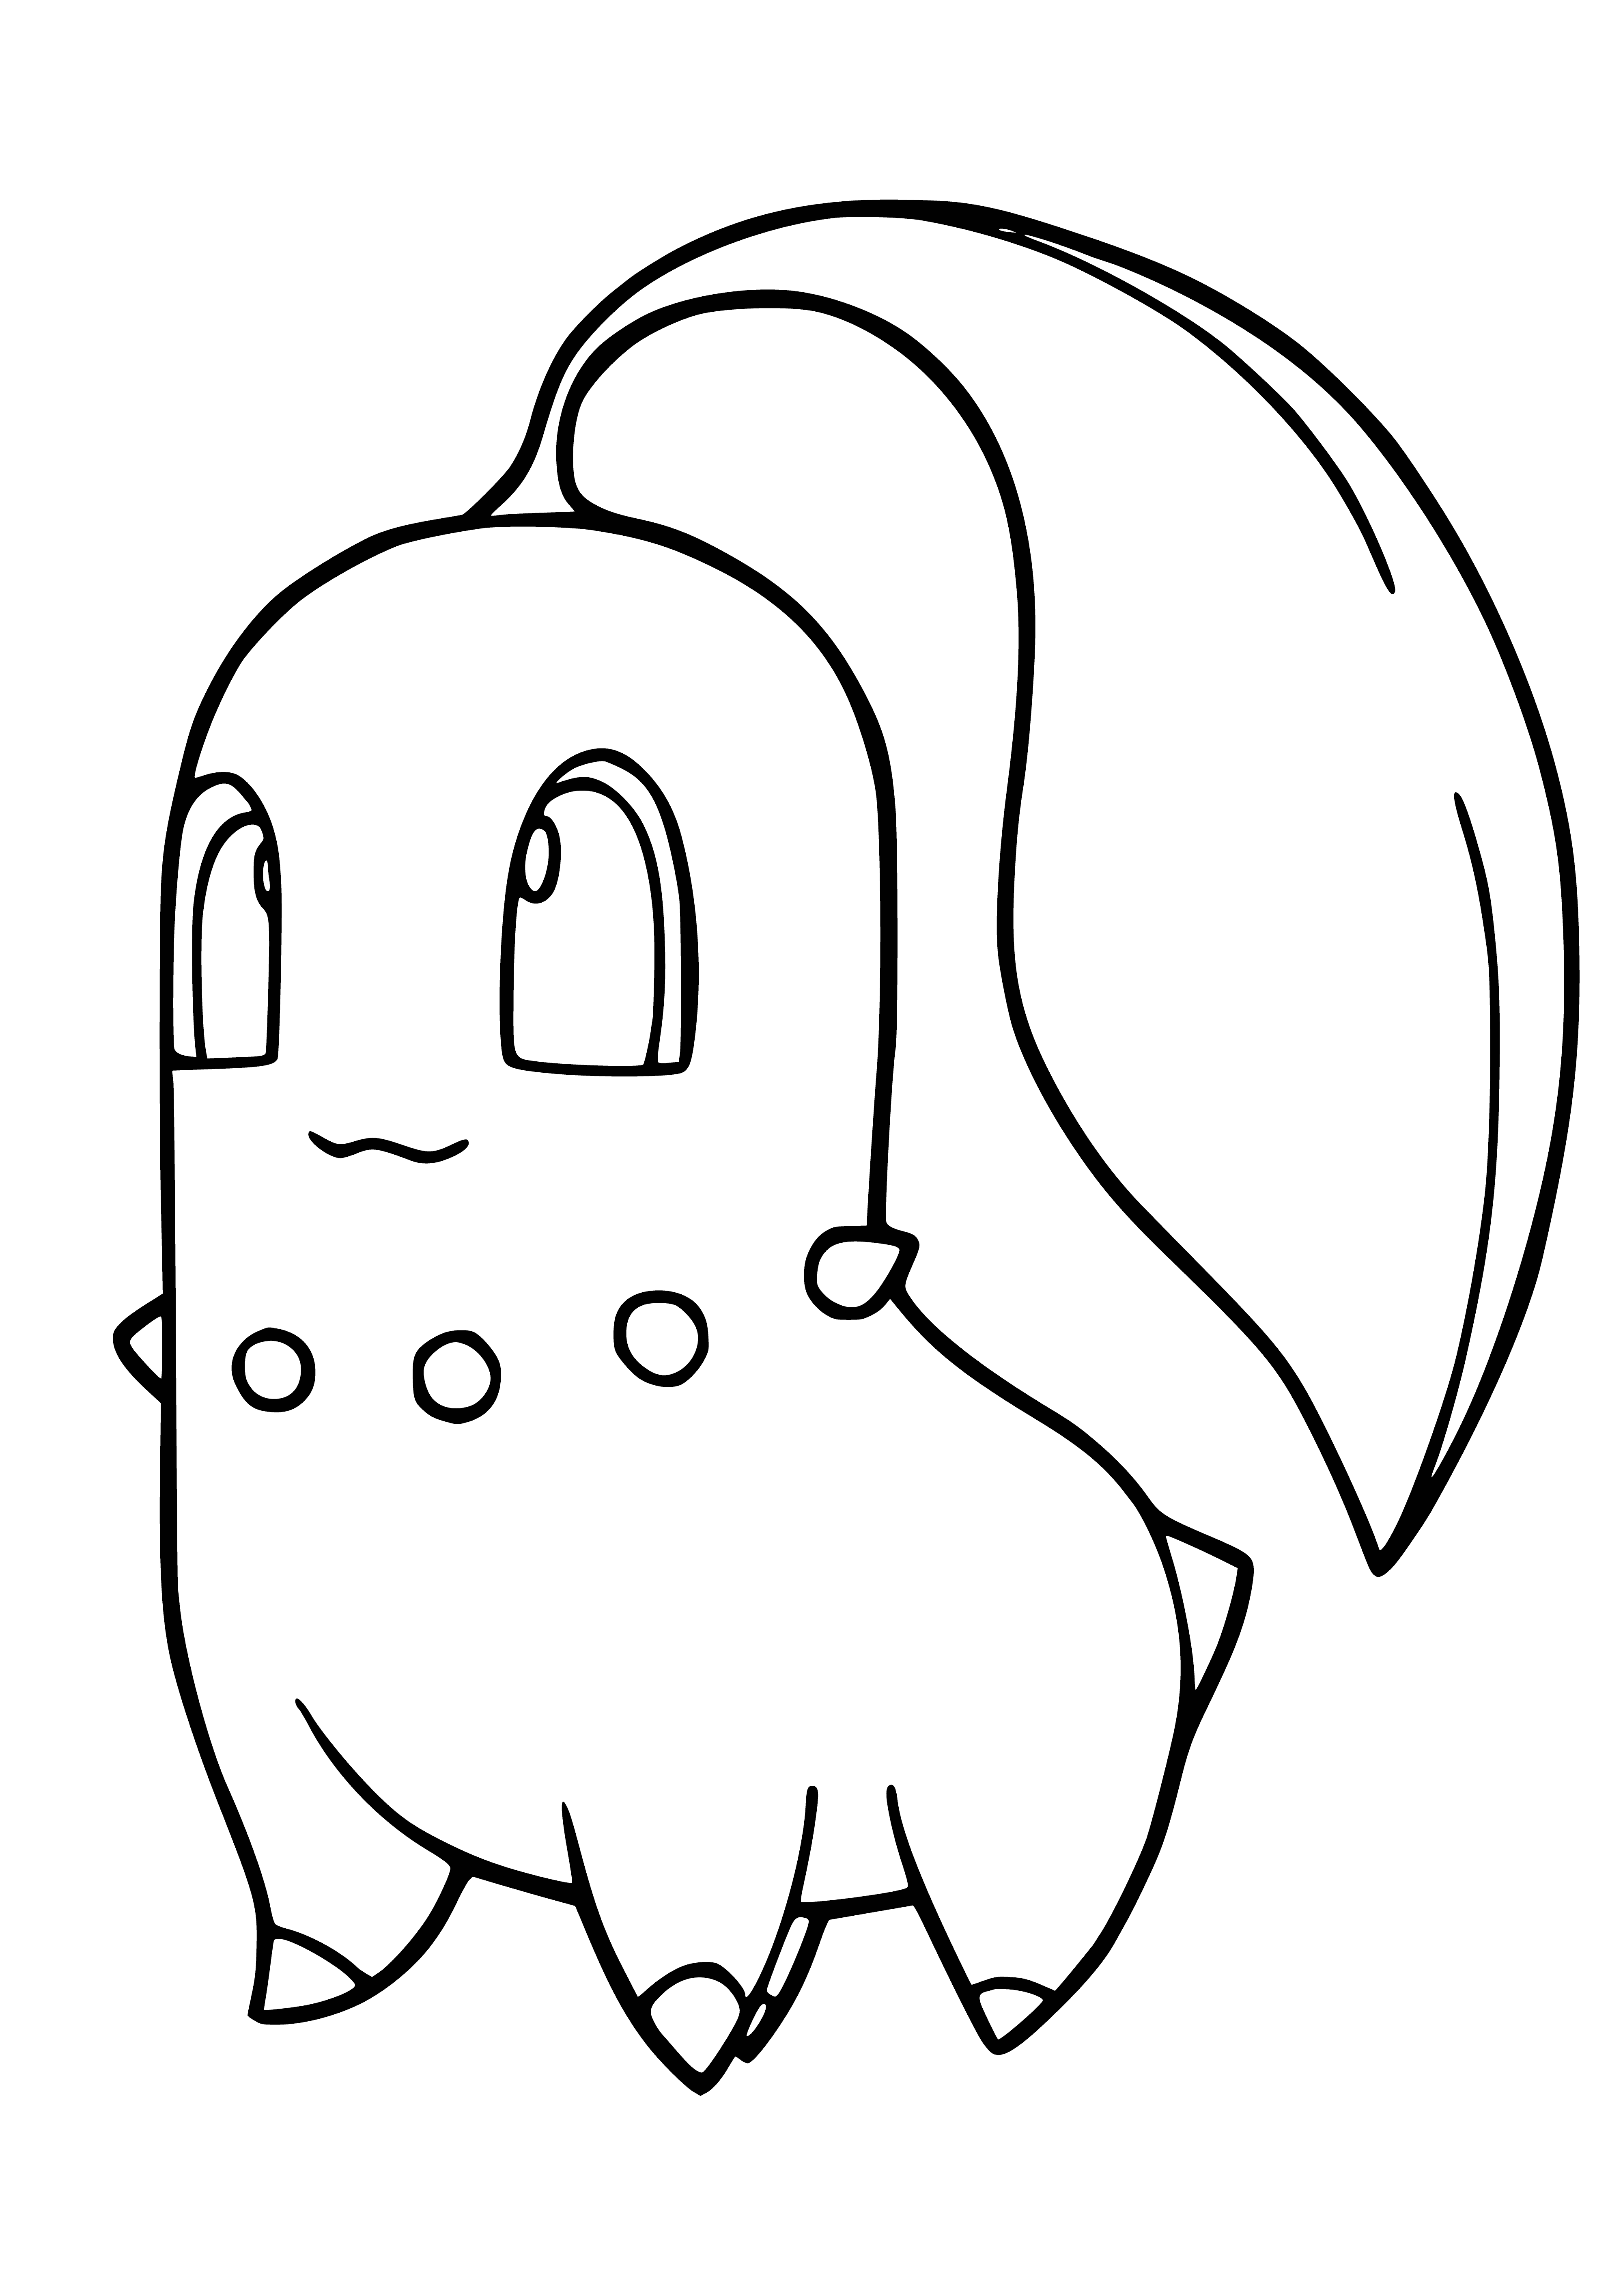 coloring page: Creature has blue body, black eyes & horns, open mouth, long neck & thin tail.